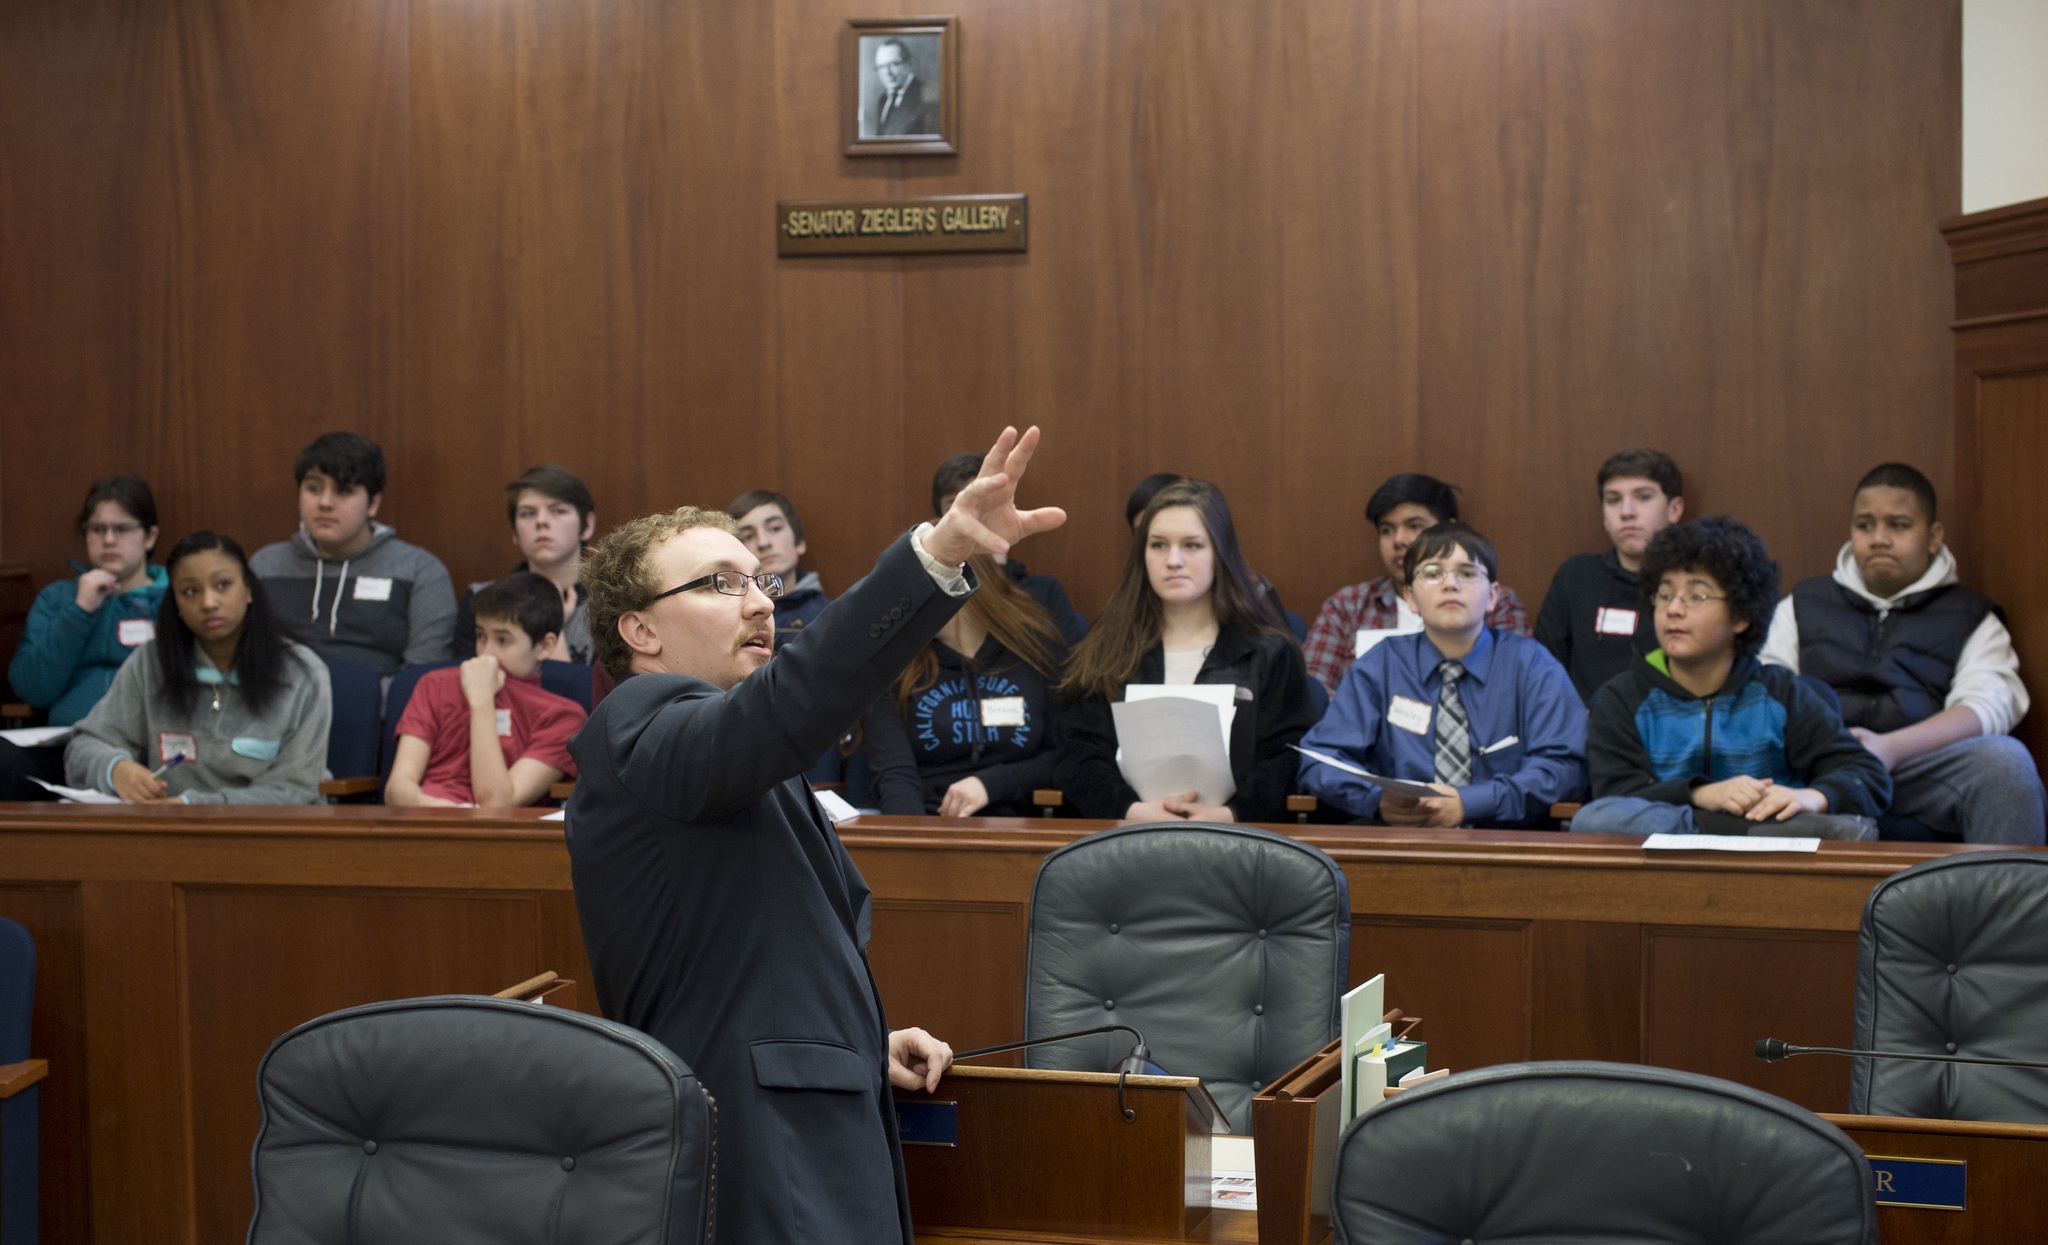 Senate Page Jacob Pennell gives eighth-graders from Floyd Dryden Middle School details about how the Senate works during a tour of the Capitol on Thursday. Juneau School District eighth-graders spend a day at the Capitol combined with a trip to the Dimond Courthouse to learn and see how their government works. The program is done by volunteers according to coordinator Marjorie Menzi. (Michael Penn | Juneau Empire)